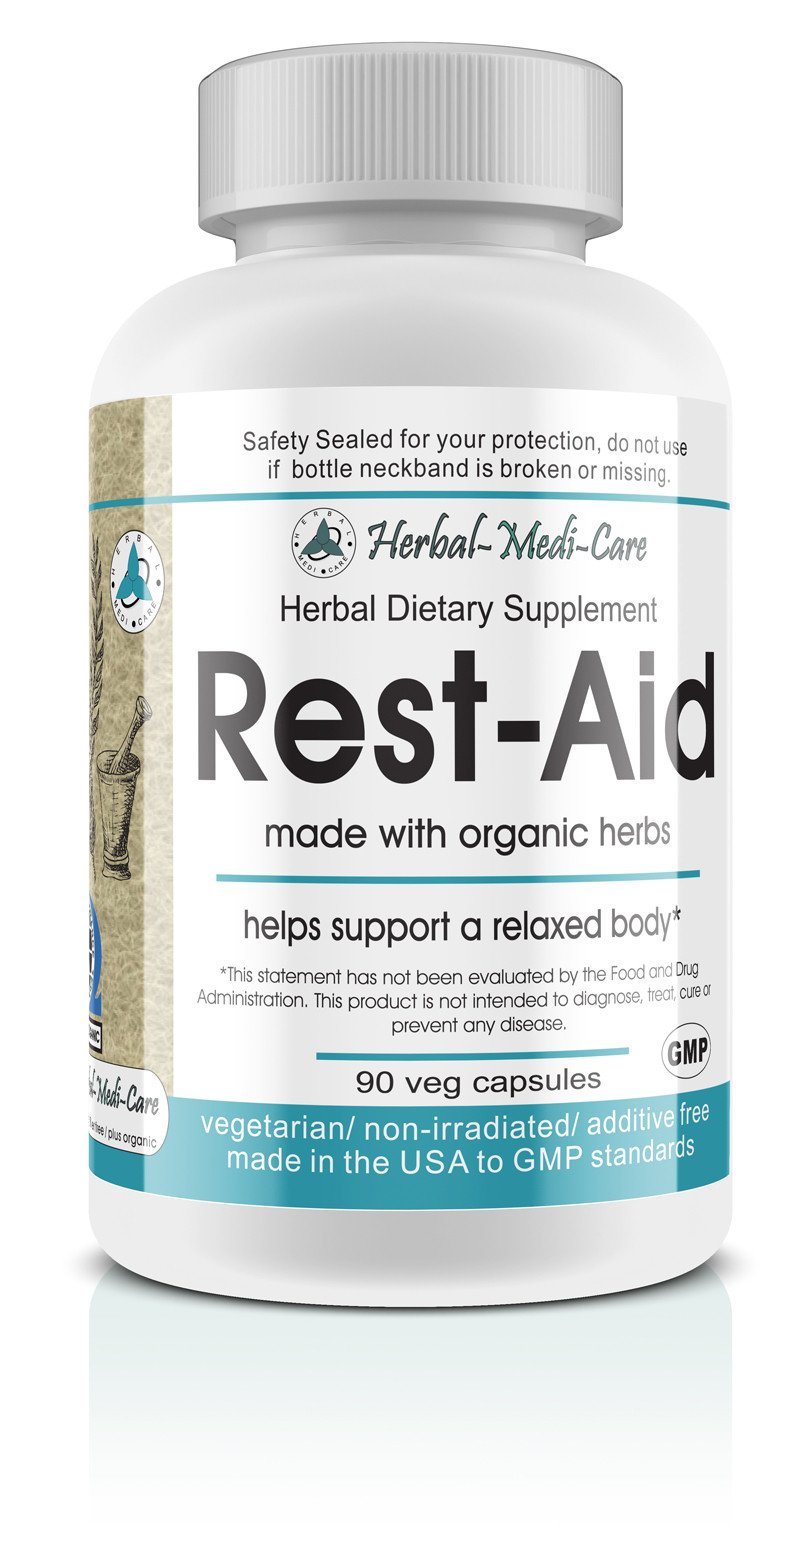 Herbal-Medi-Care Whole Food Rest-Aid (Stress And Sleep) Vegetarian Capsules; 90-Count, Made with Organic - Herbal-Medi-Care Whole Food Rest-Aid (Stress And Sleep) Vegetarian Capsules; 90-Count, Made with Organic - Herbal-Medi-Care Whole Food Rest-Aid (Stress And Sleep) Vegetarian Capsules; 90-Count, Made with Organic